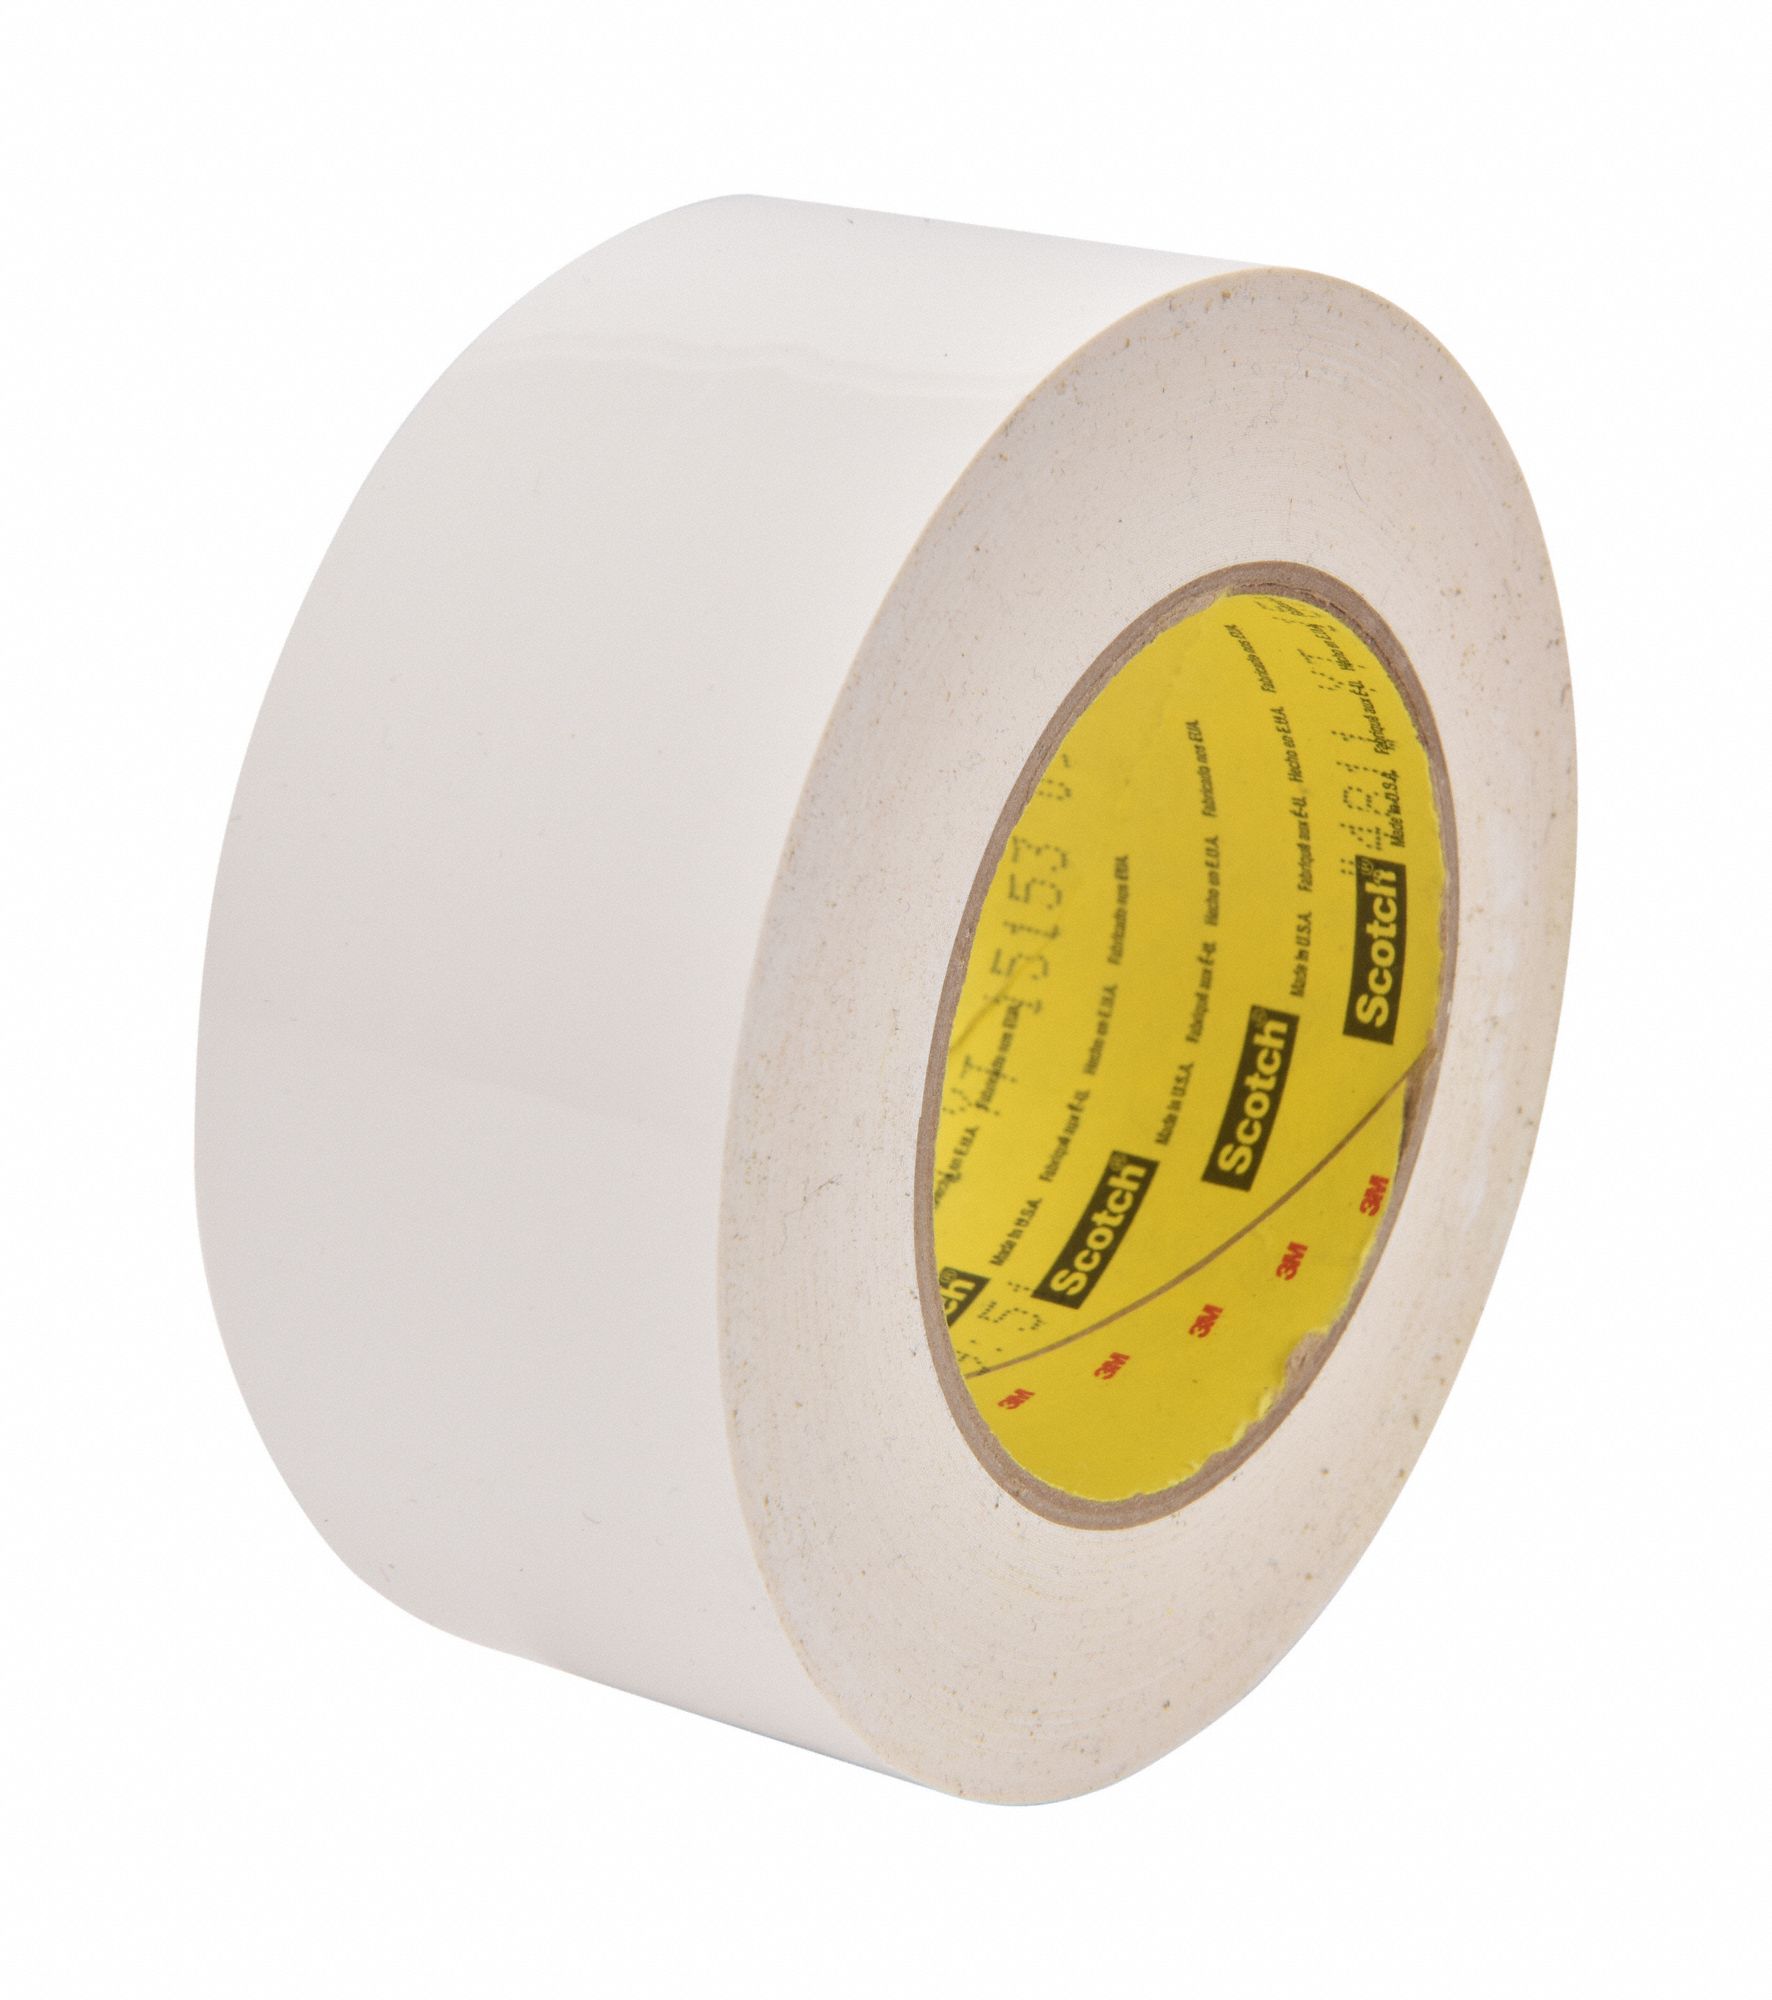 MMBM 1368 Rolls - 2 Mil - White Colored Packing Sealing Tape Convenient,  Product Coding, Dating Inventory, White, 2 x 110 Yards, 3 Core